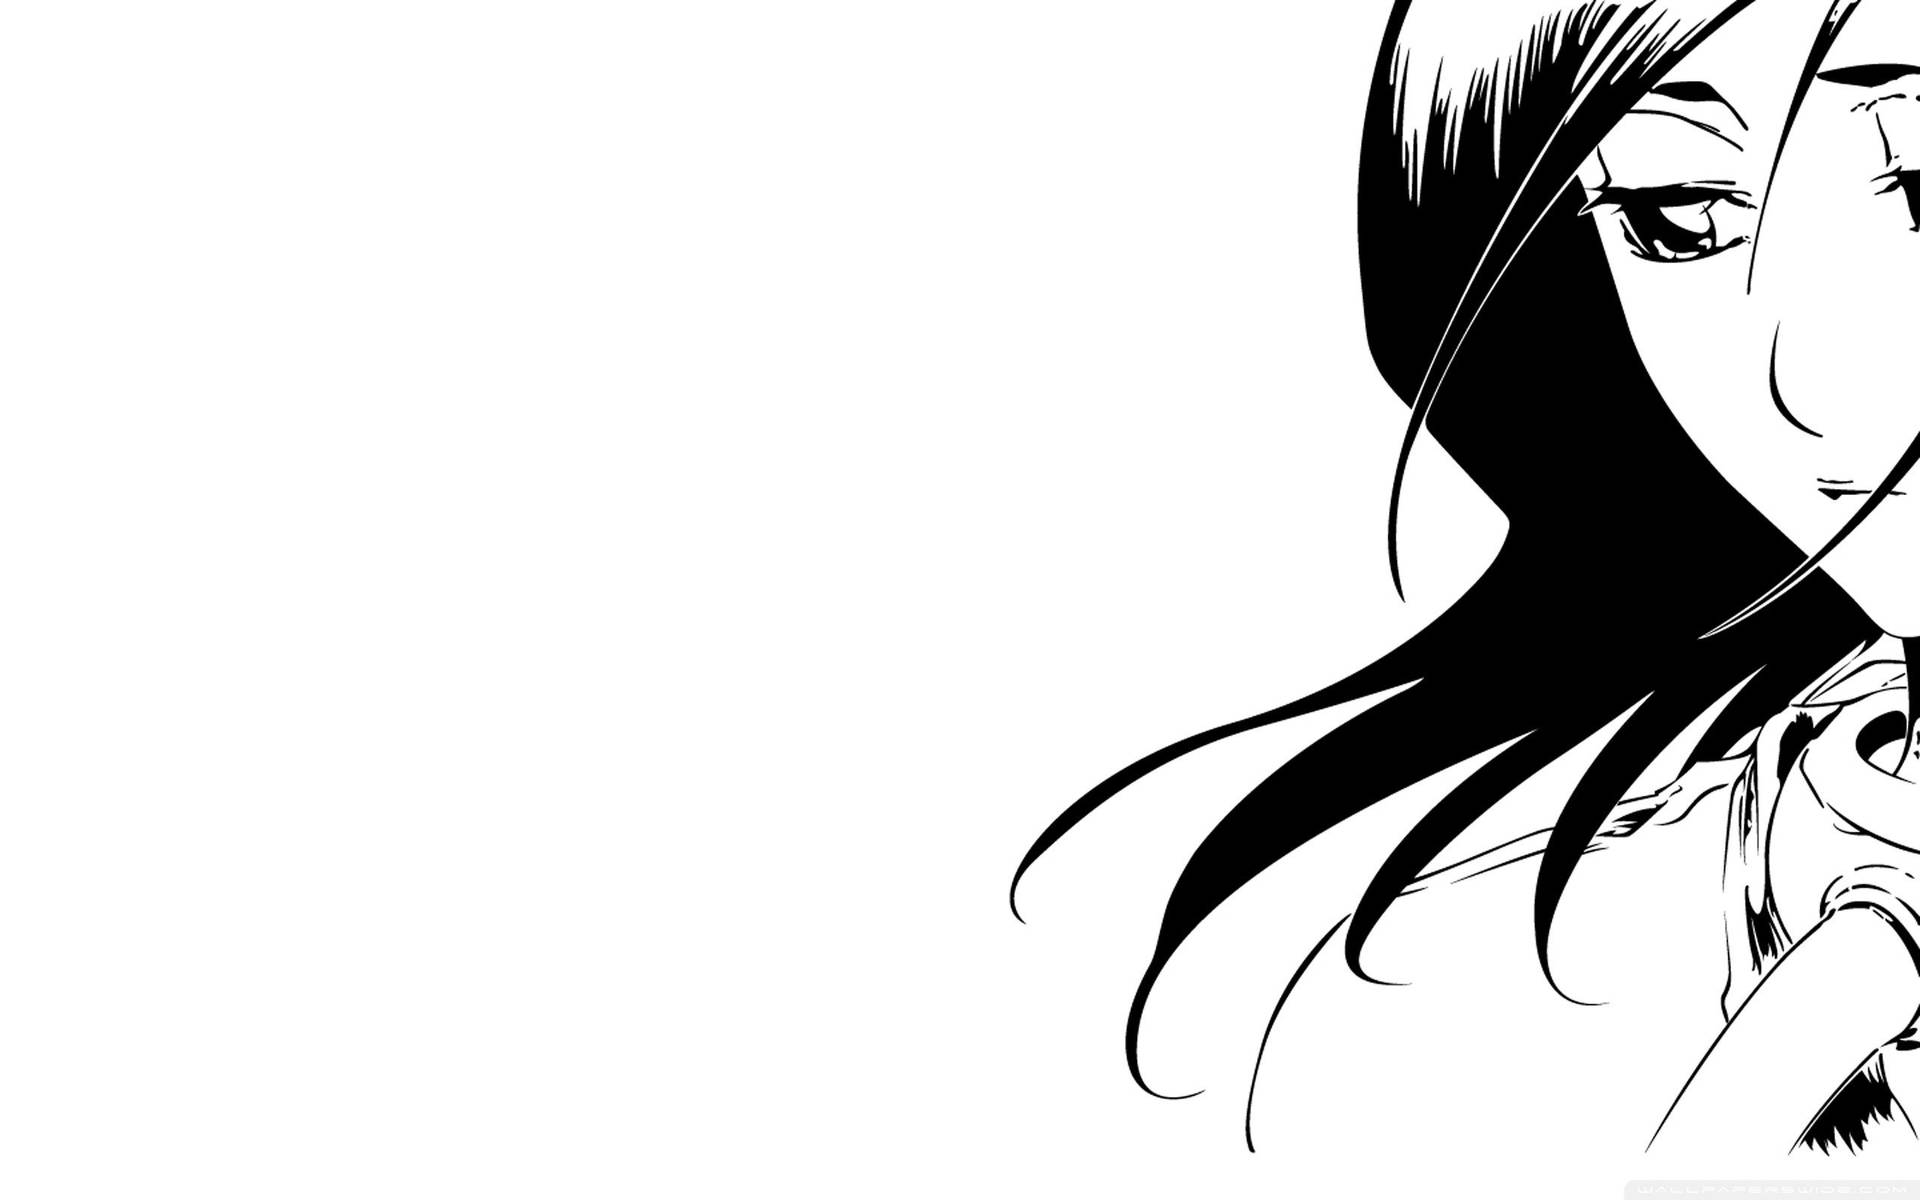 Rukia Kuchiki from Bleach stands out against the urban landscape Wallpaper